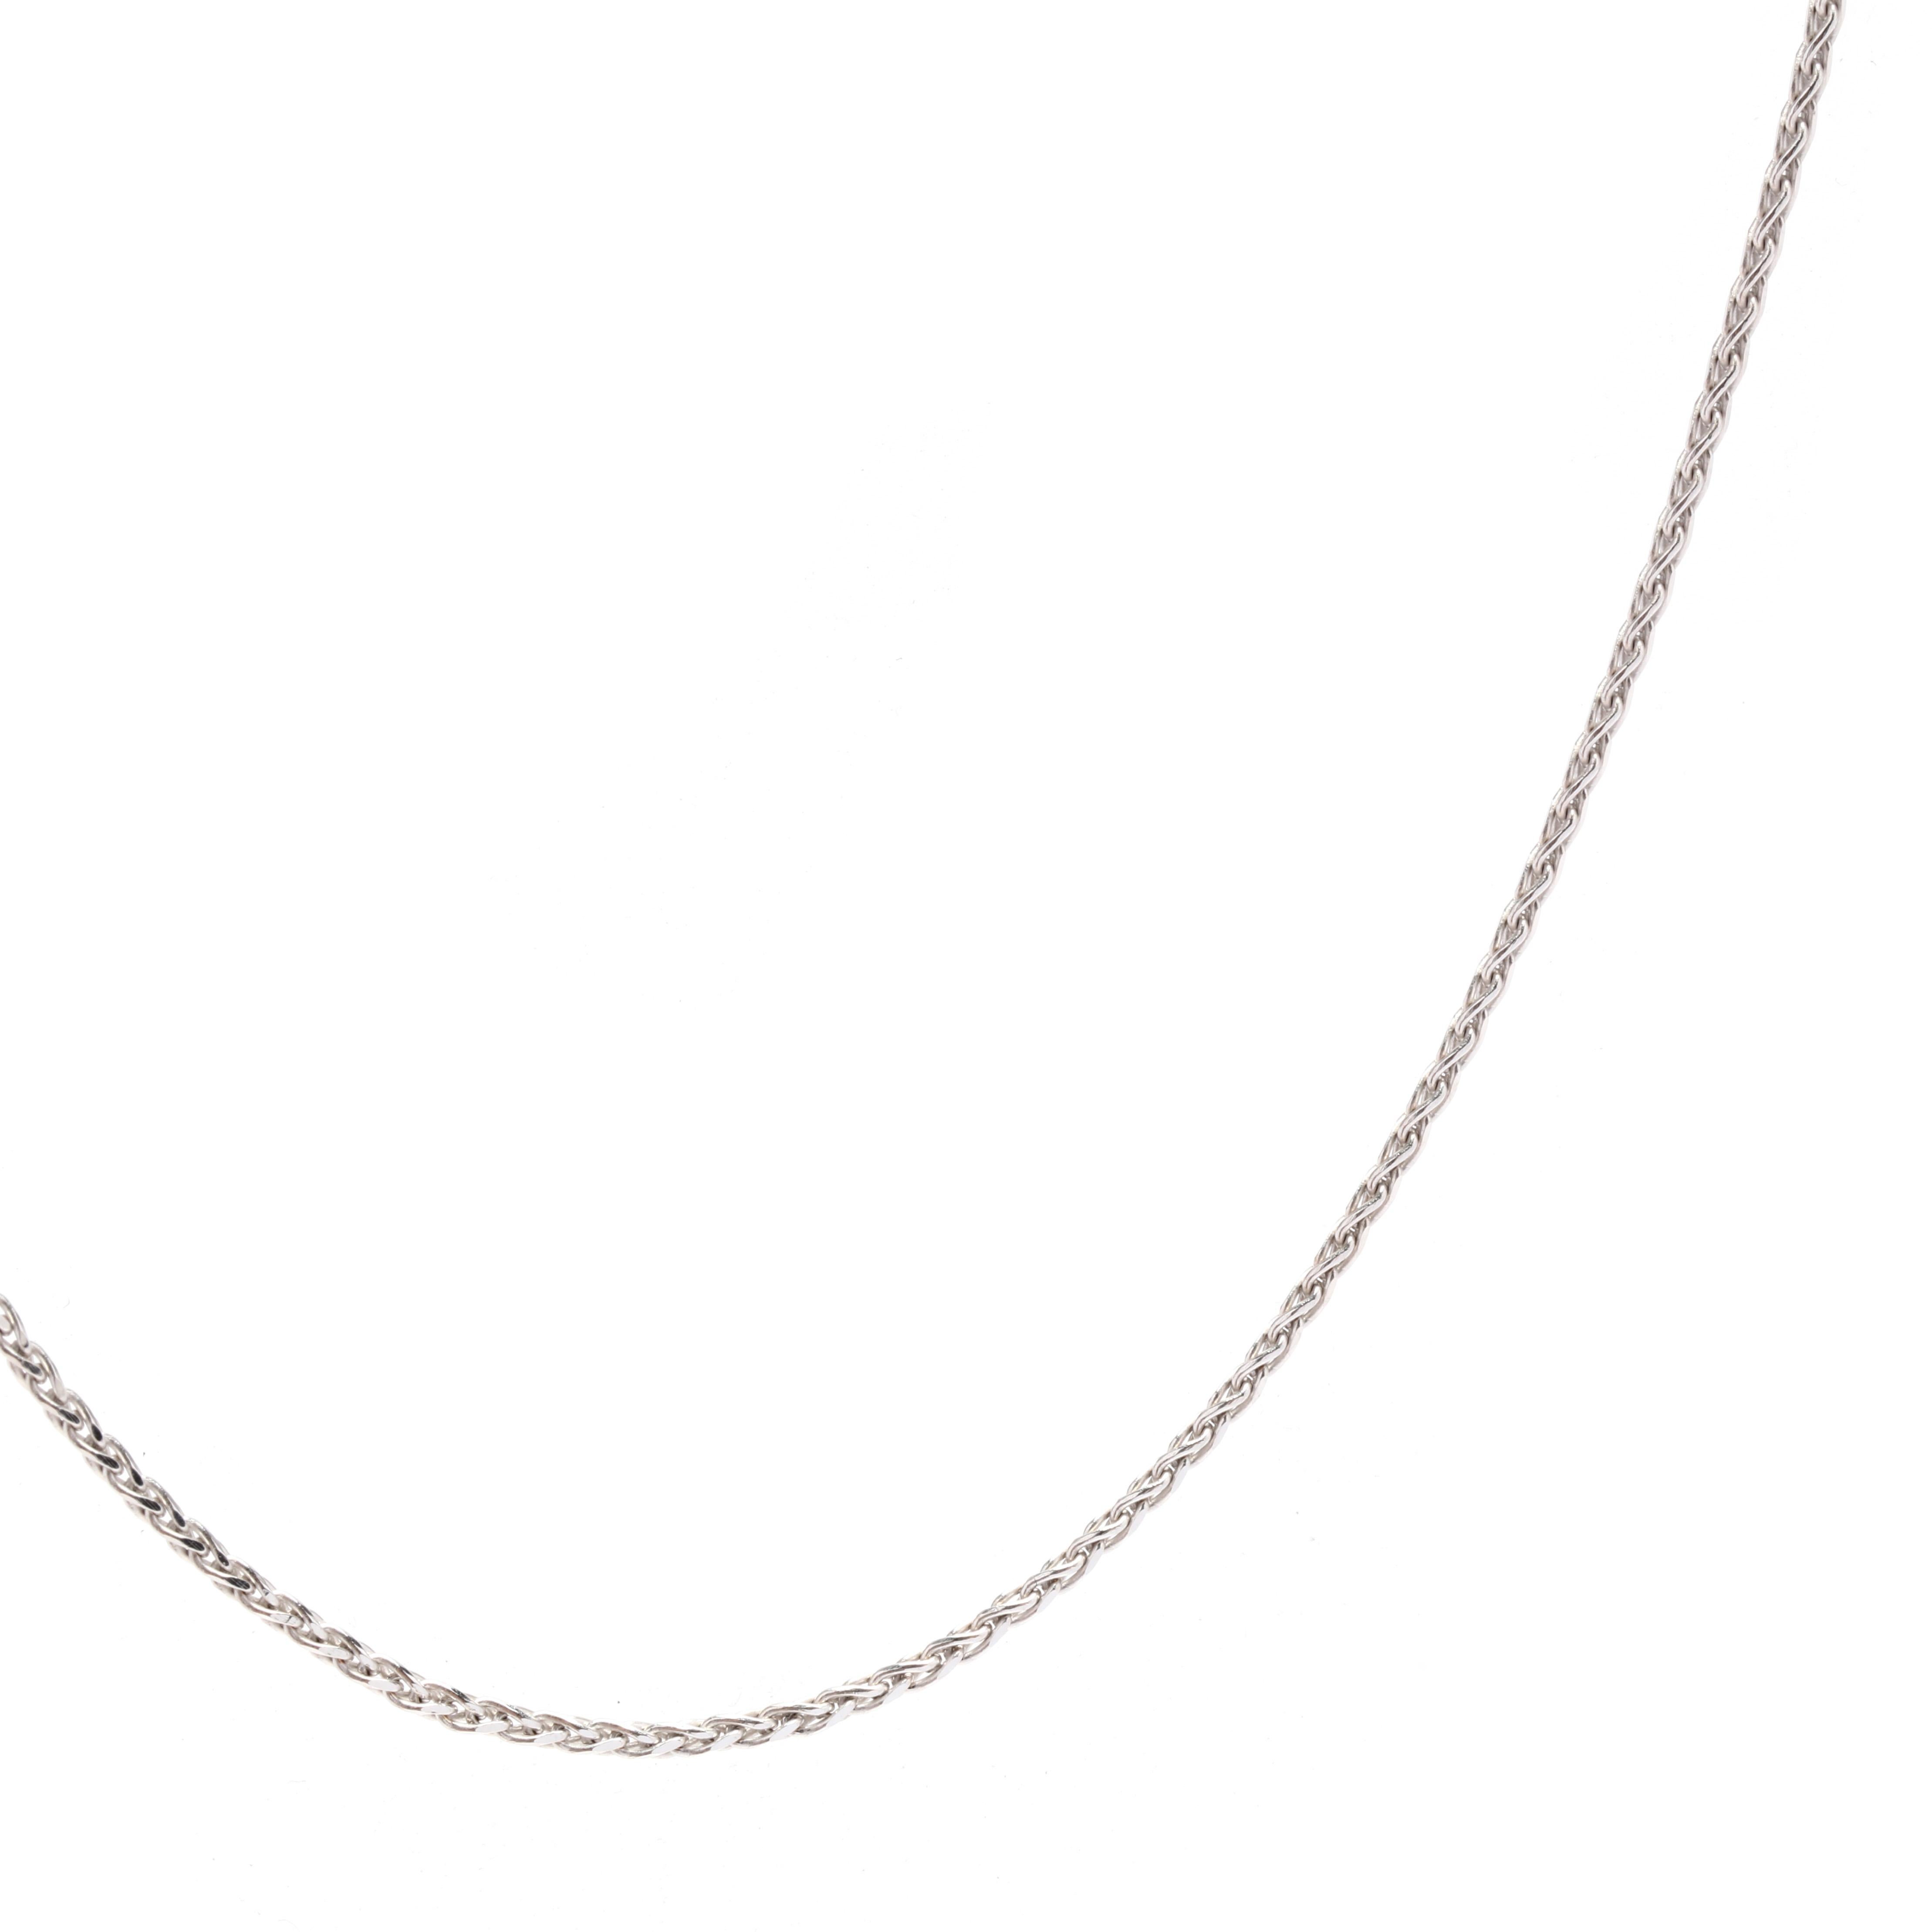 A vintage 14 karat white gold wheat chain. This thin pendant chain features a thin woven wheat design with a lobster clasp.

Length: 16 in.

Width: 1 mm

Weight: 1.5 dwts. / 2.33 grams

Stamps: 14K

Ring Sizings & Modifications:
*Please reach out